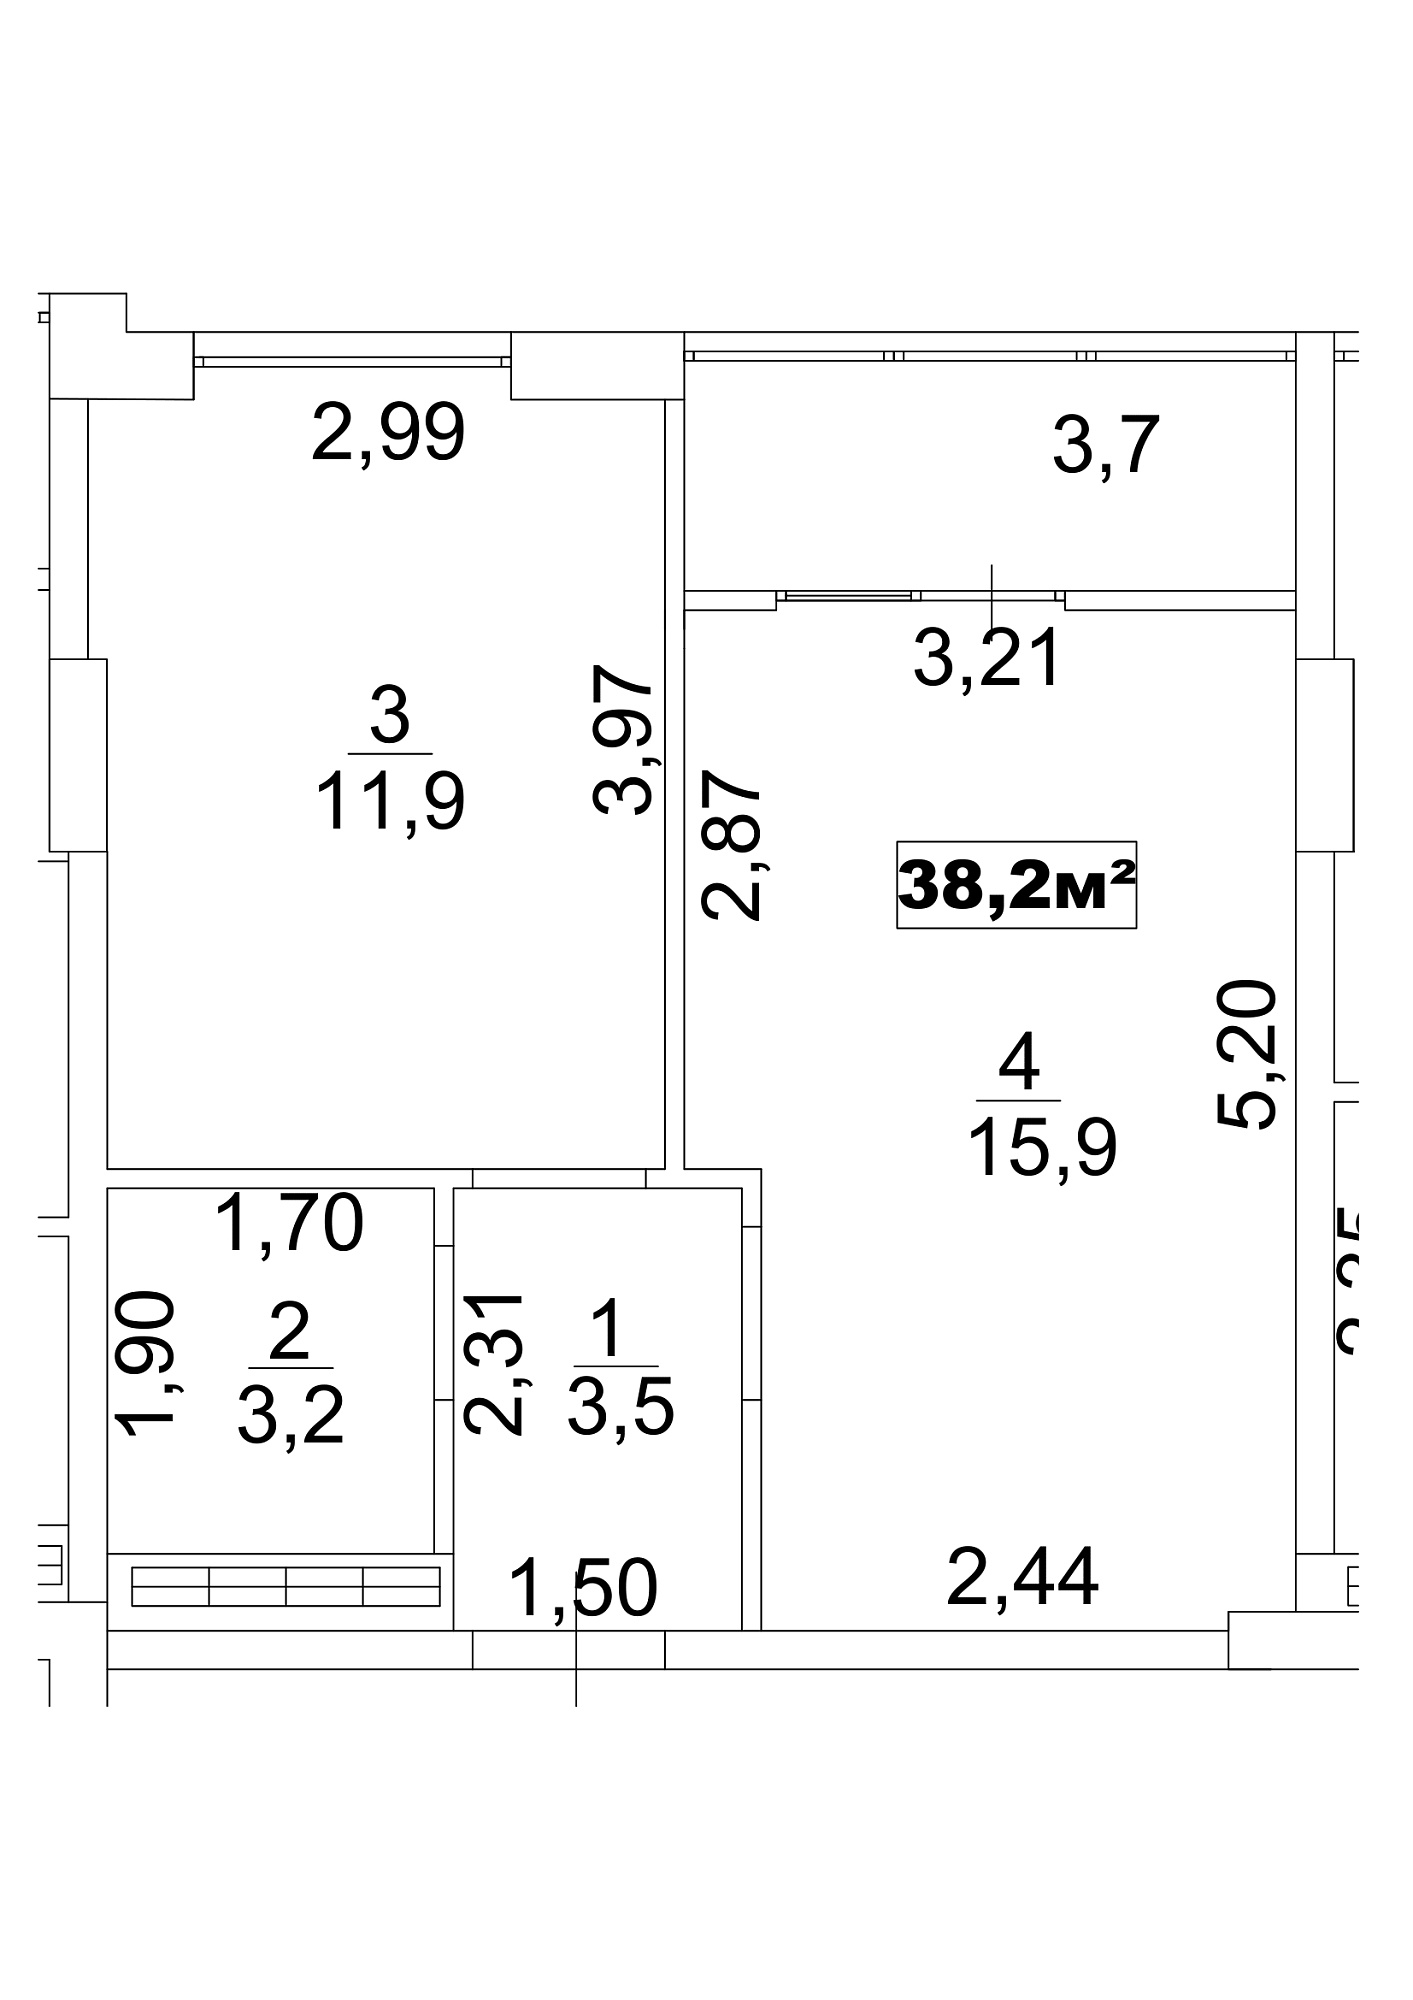 Planning 1-rm flats area 38.2m2, AB-13-06/00048.